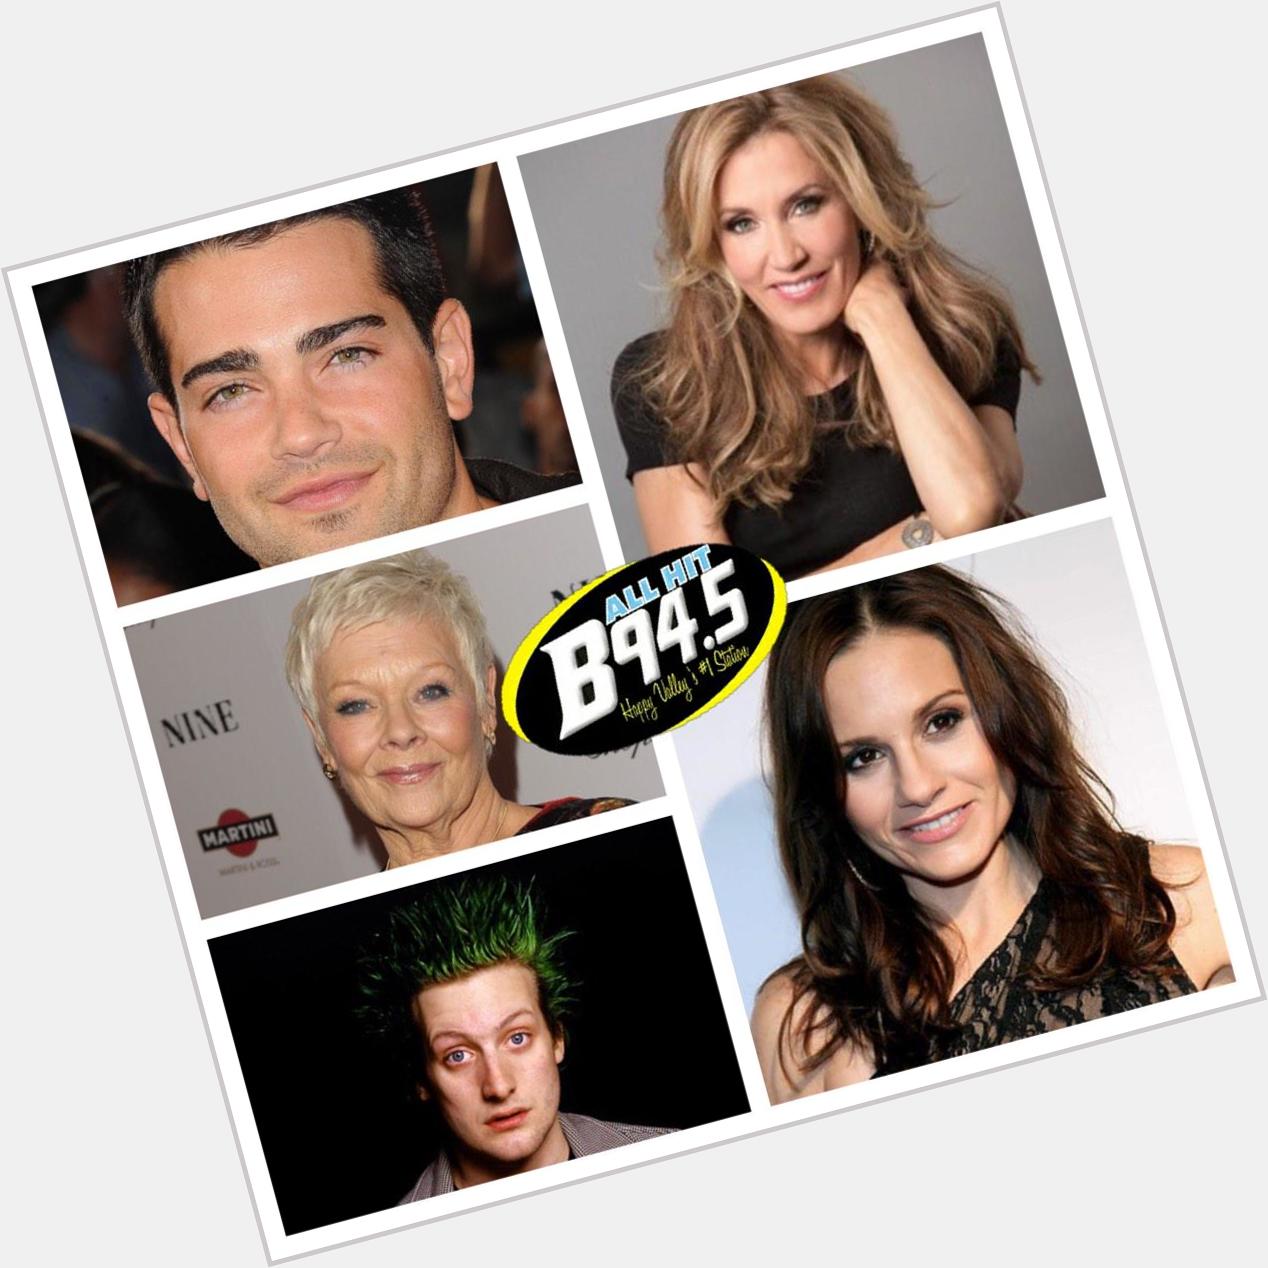 B94.5 wants to wish   Judi Dench and Tre Cool a Happy Birthday!! 